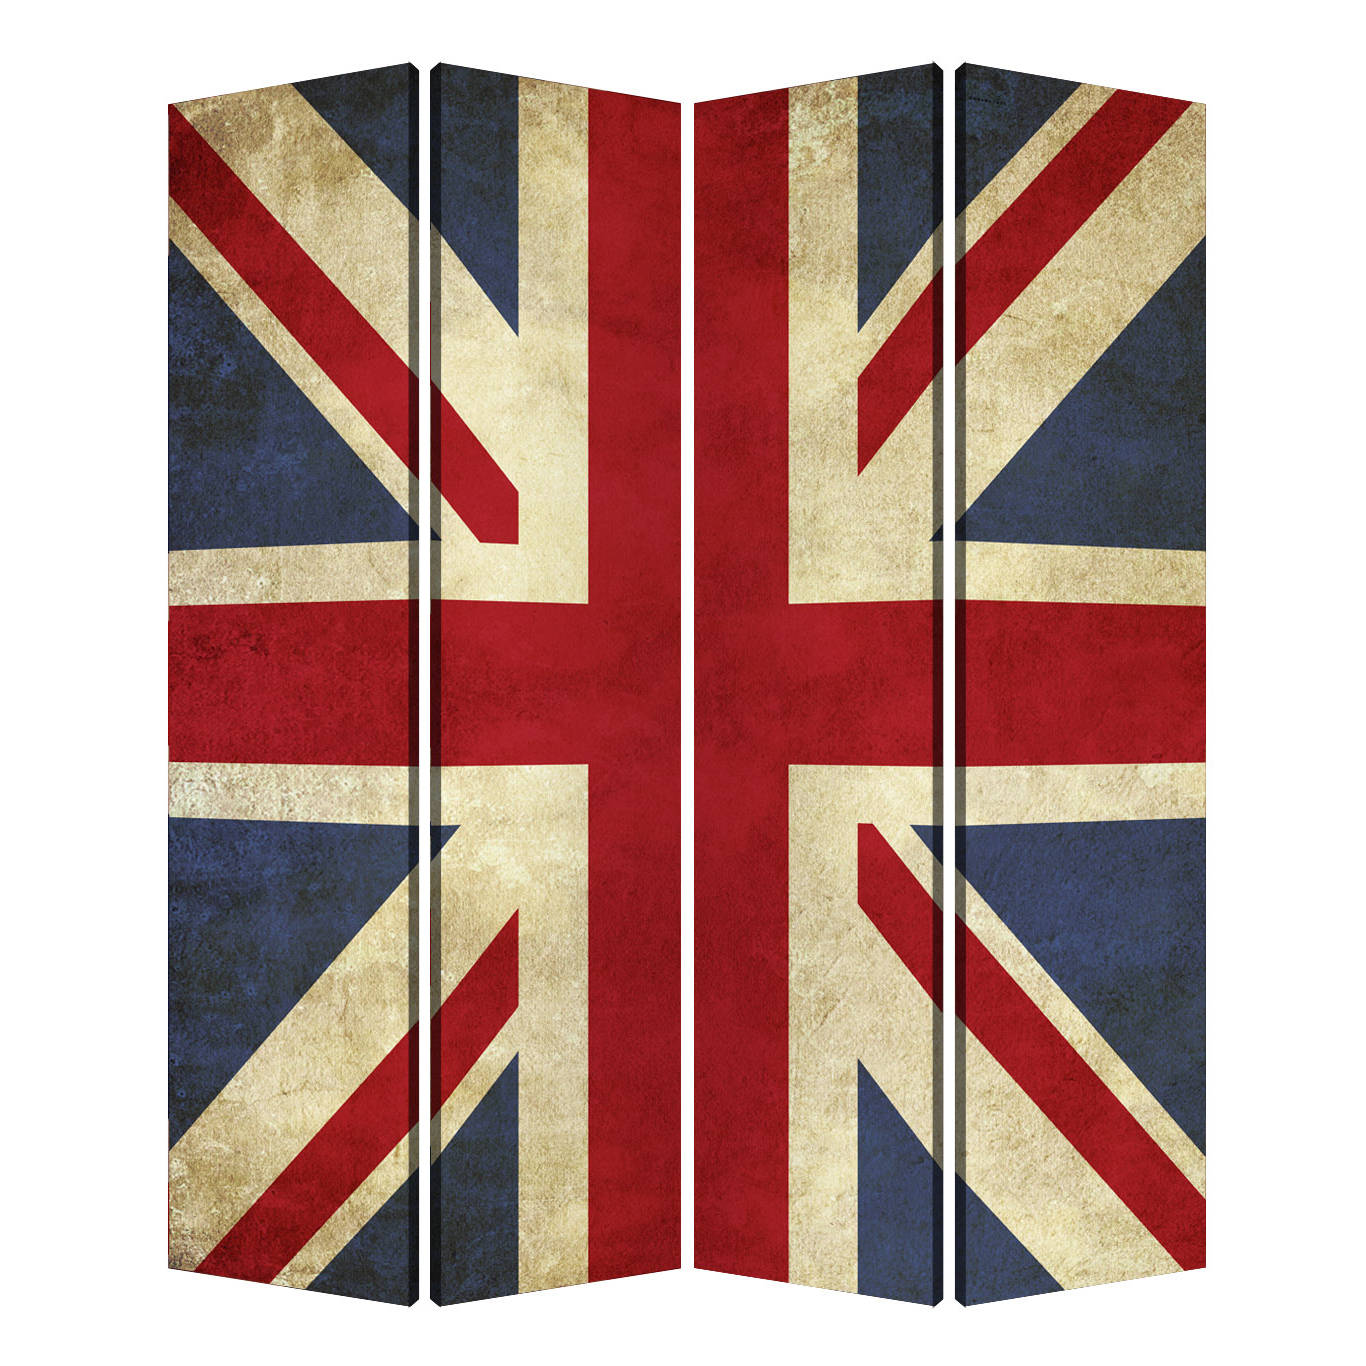 SCREEN GEMS FURNITURE ACCESSORIES Handmade Union Jack Printed Canvas Screen - image 2 of 2